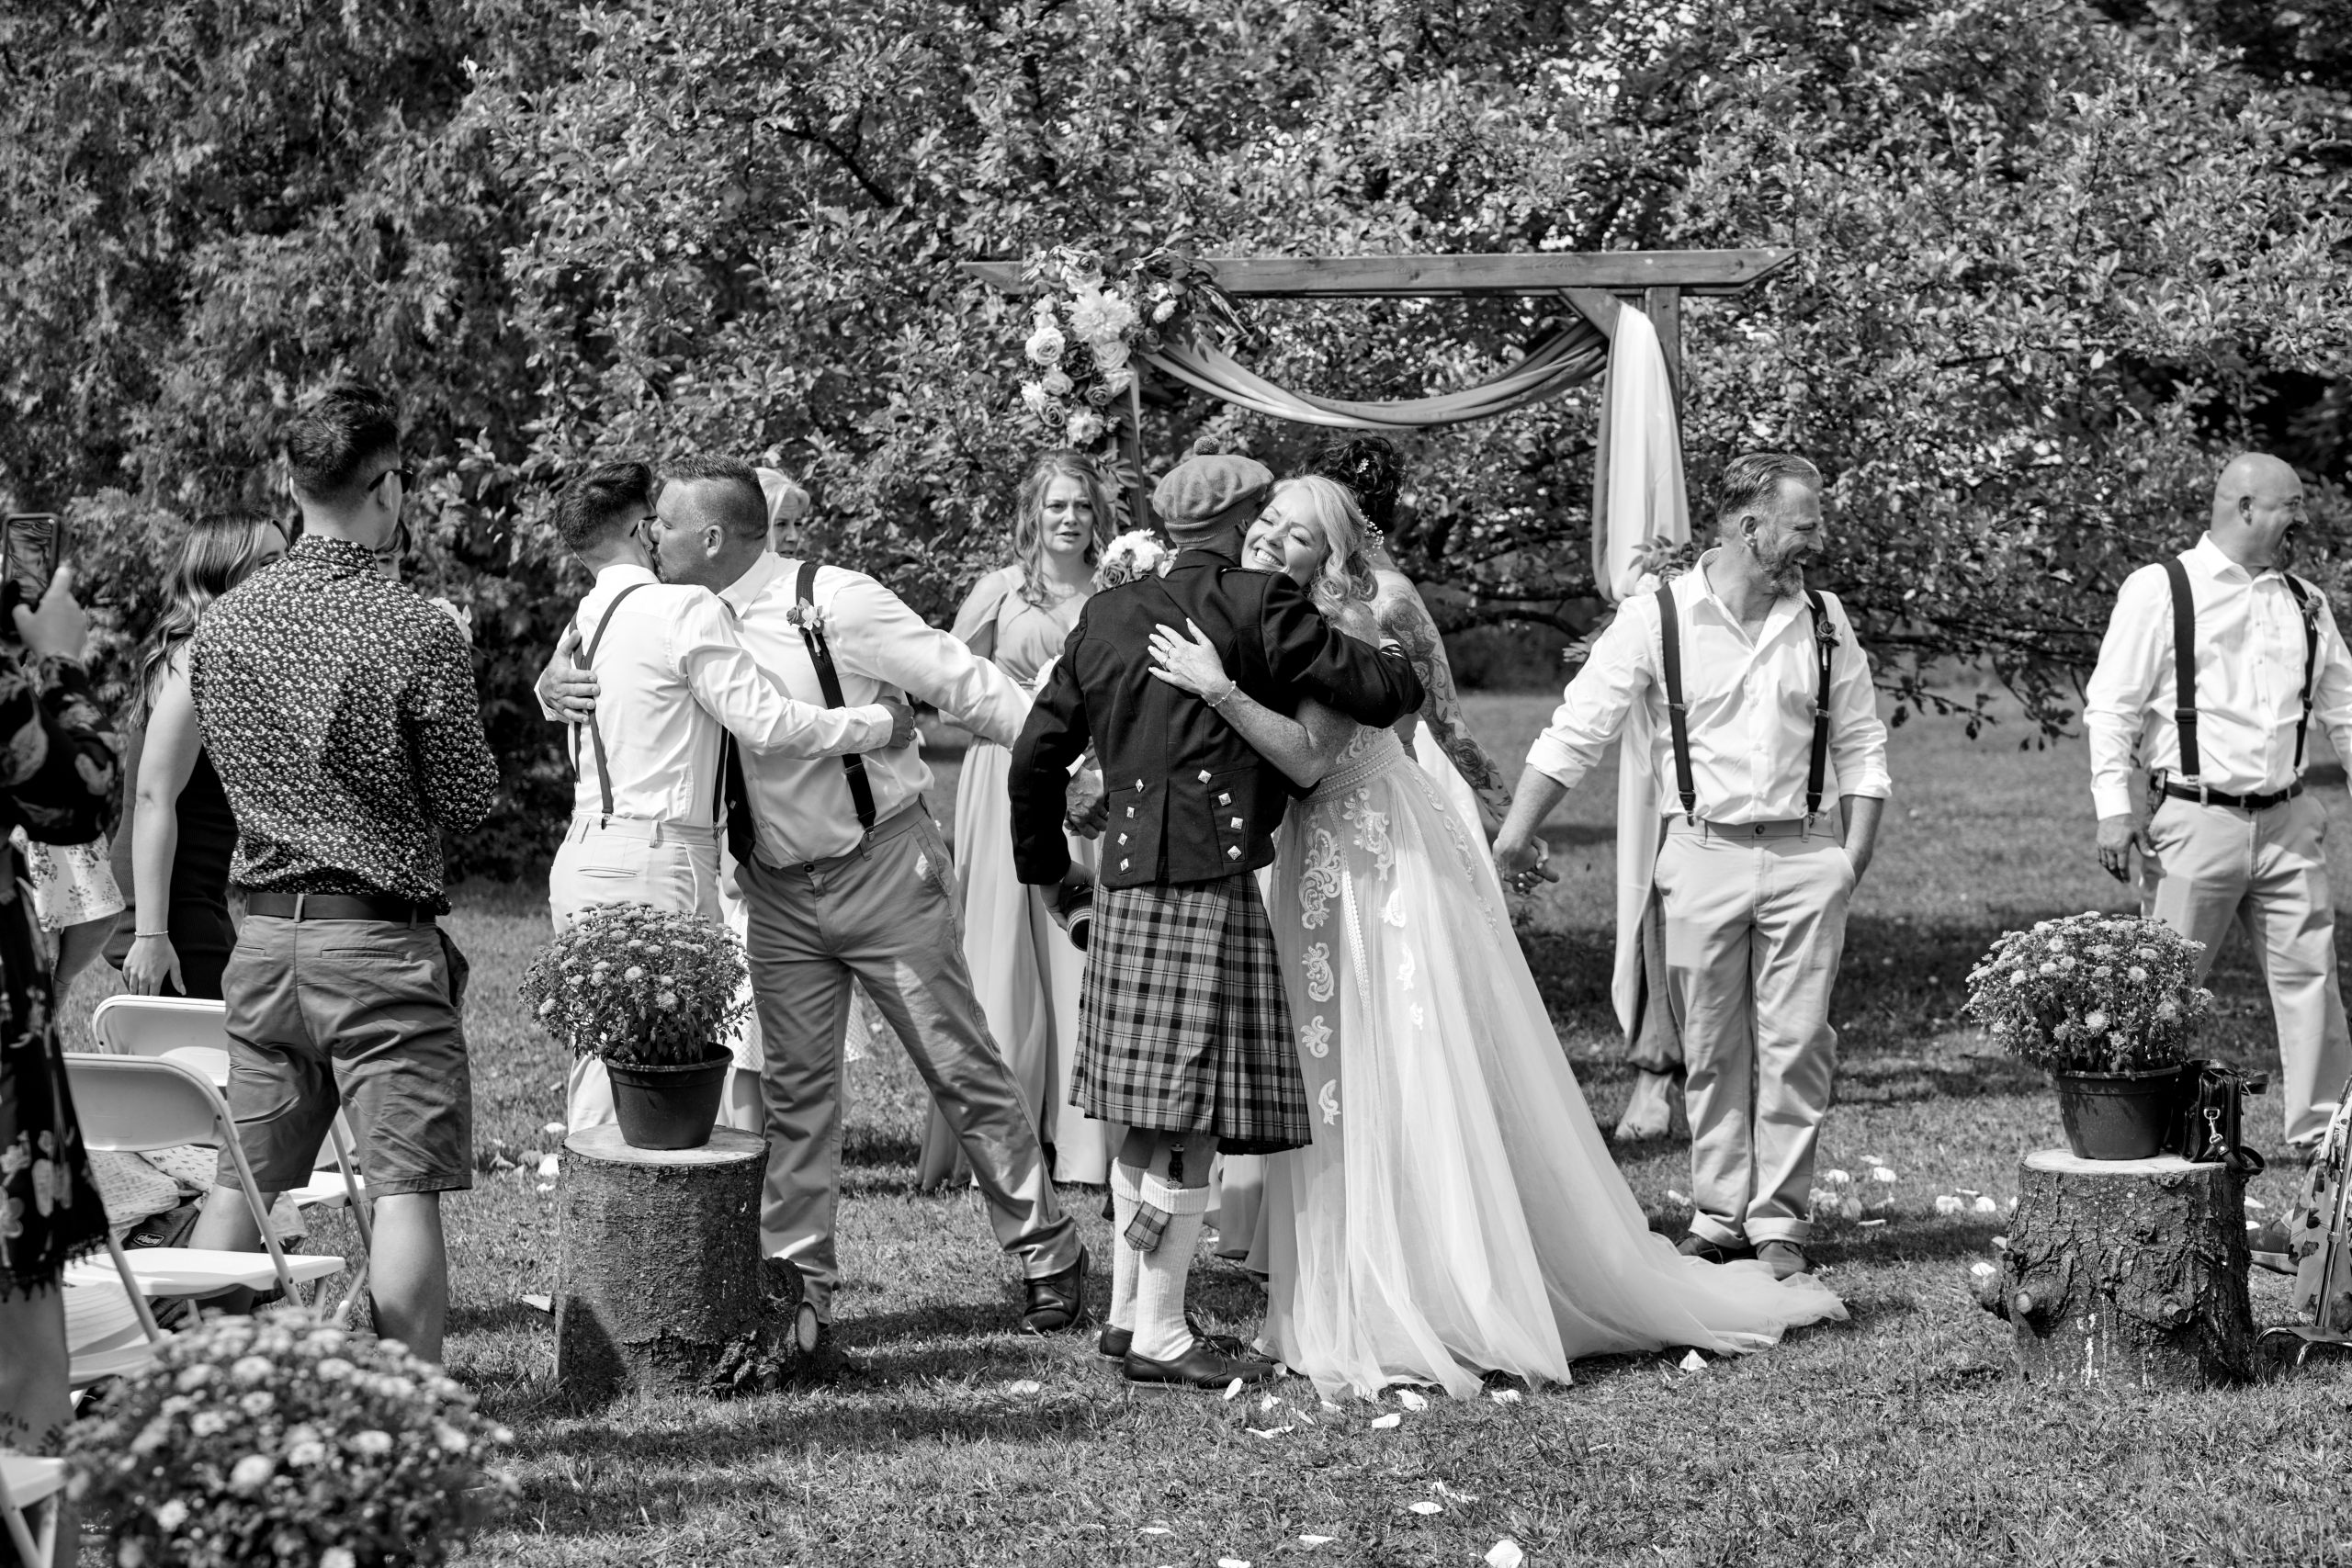 A newly married couple embrace loved ones immediately after ceremony at outdoor wedding